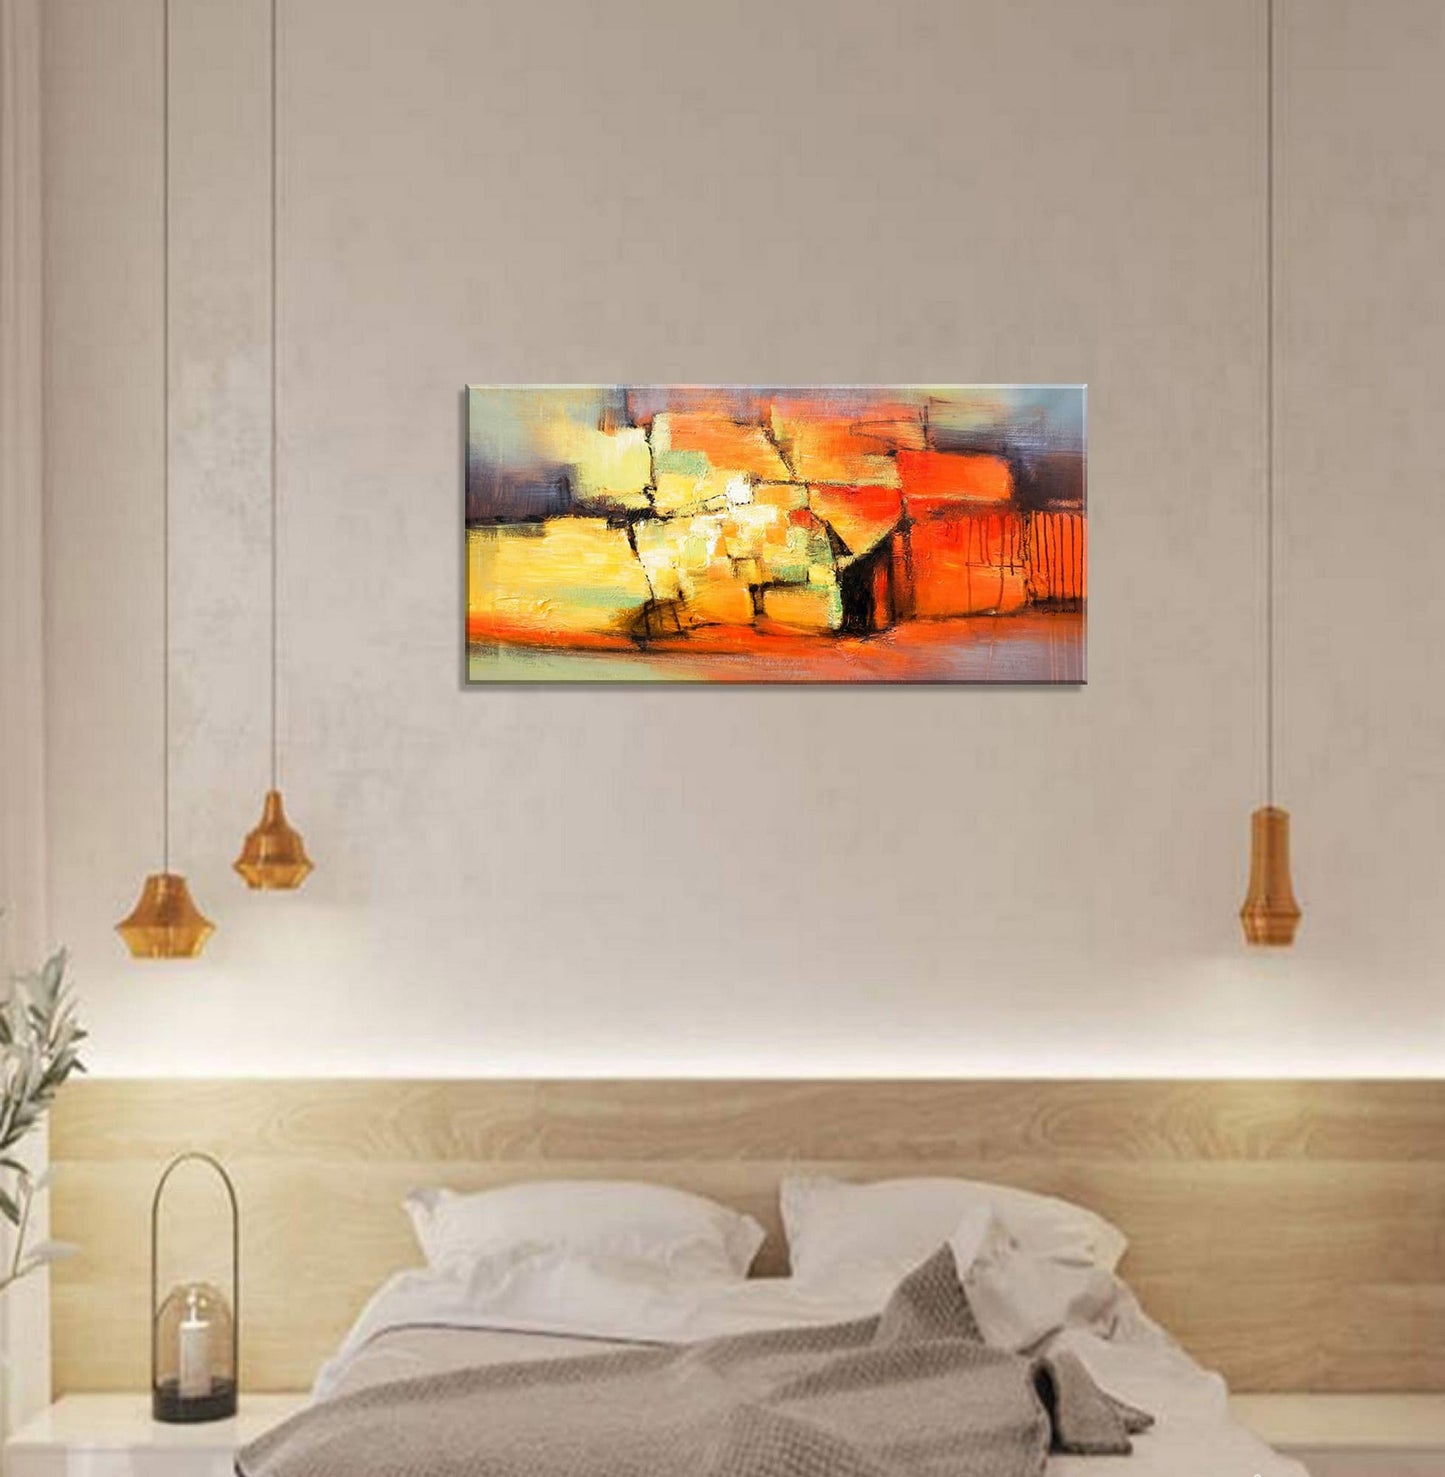 Canvas Art, Large Canvas Painting, Contemporary Painting, Original Artwork, Livingroom Sign, Large Wall Decor, Abstract Painting, Red Yellow